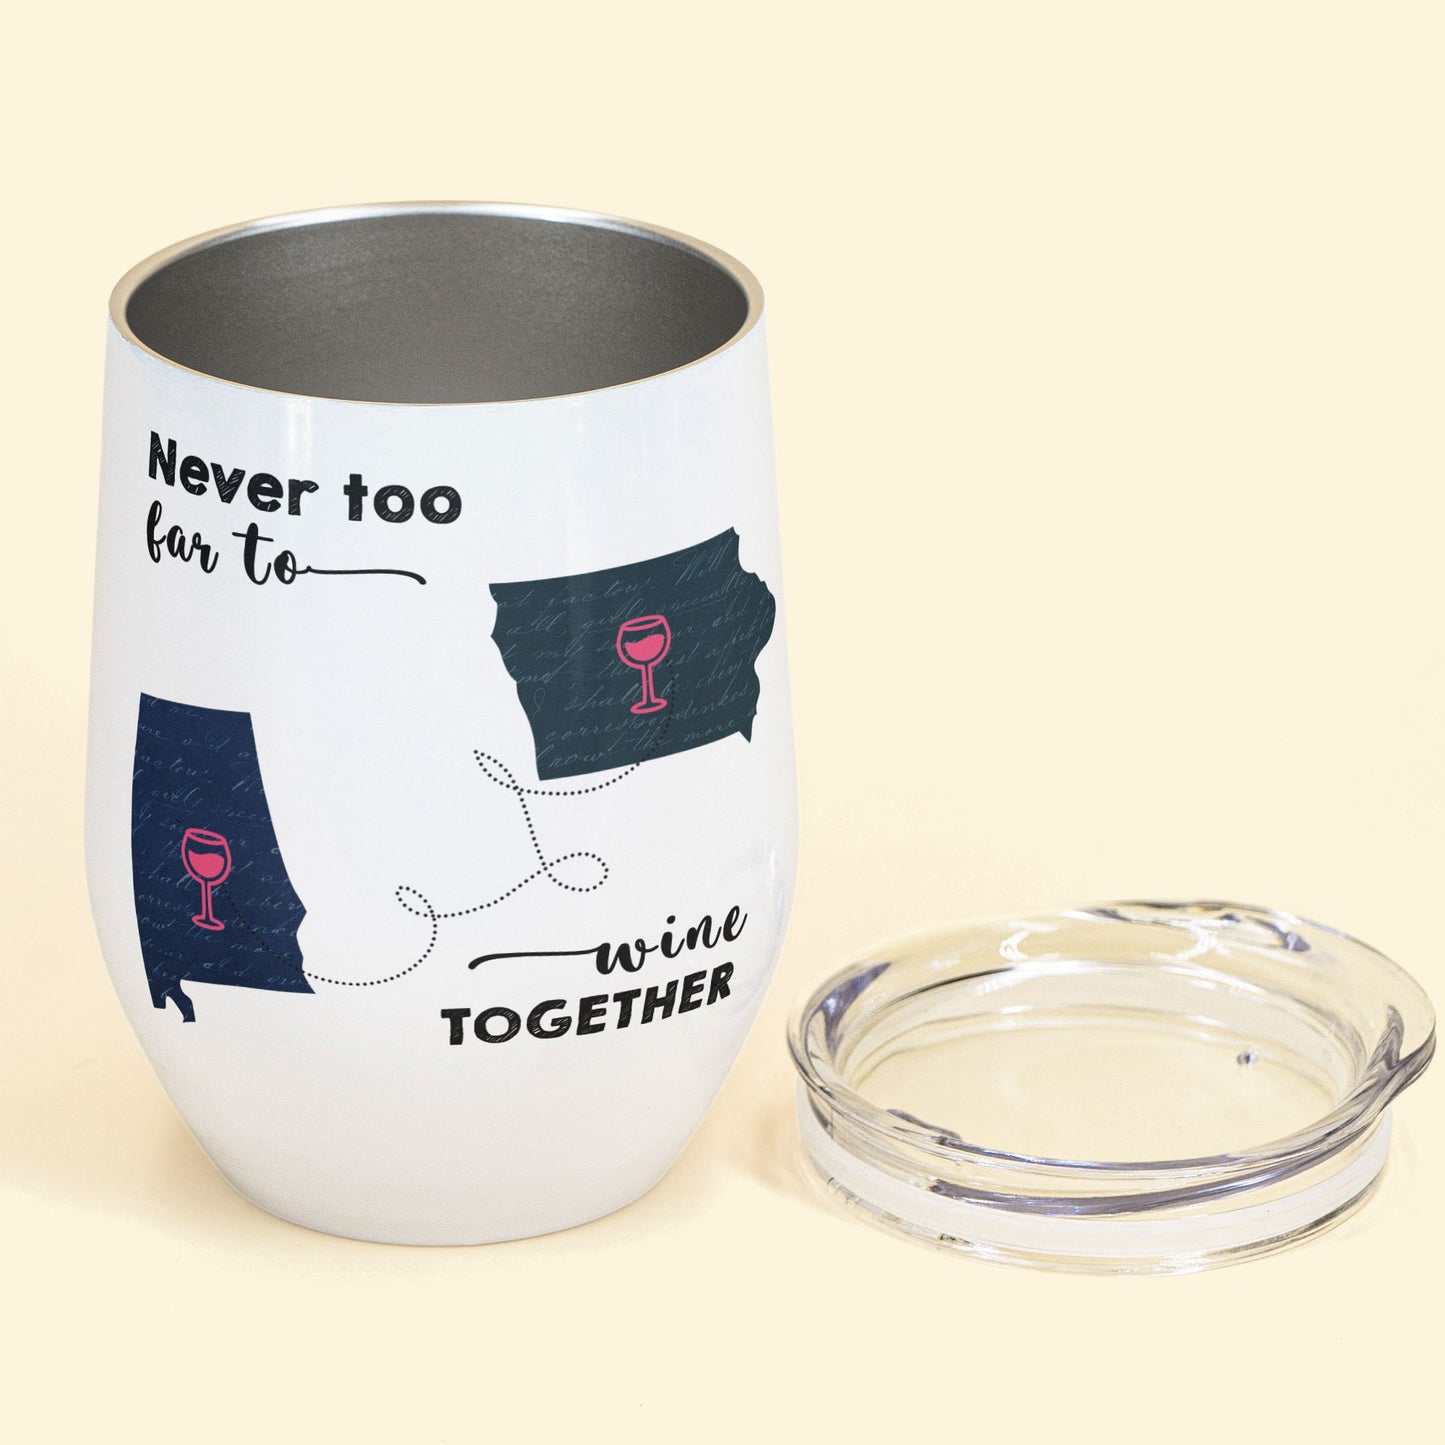 Never Too Far To Wine Together - Personalized Wine Tumbler - Gift For Bestie, Wine Lovers - Friend-Macorner